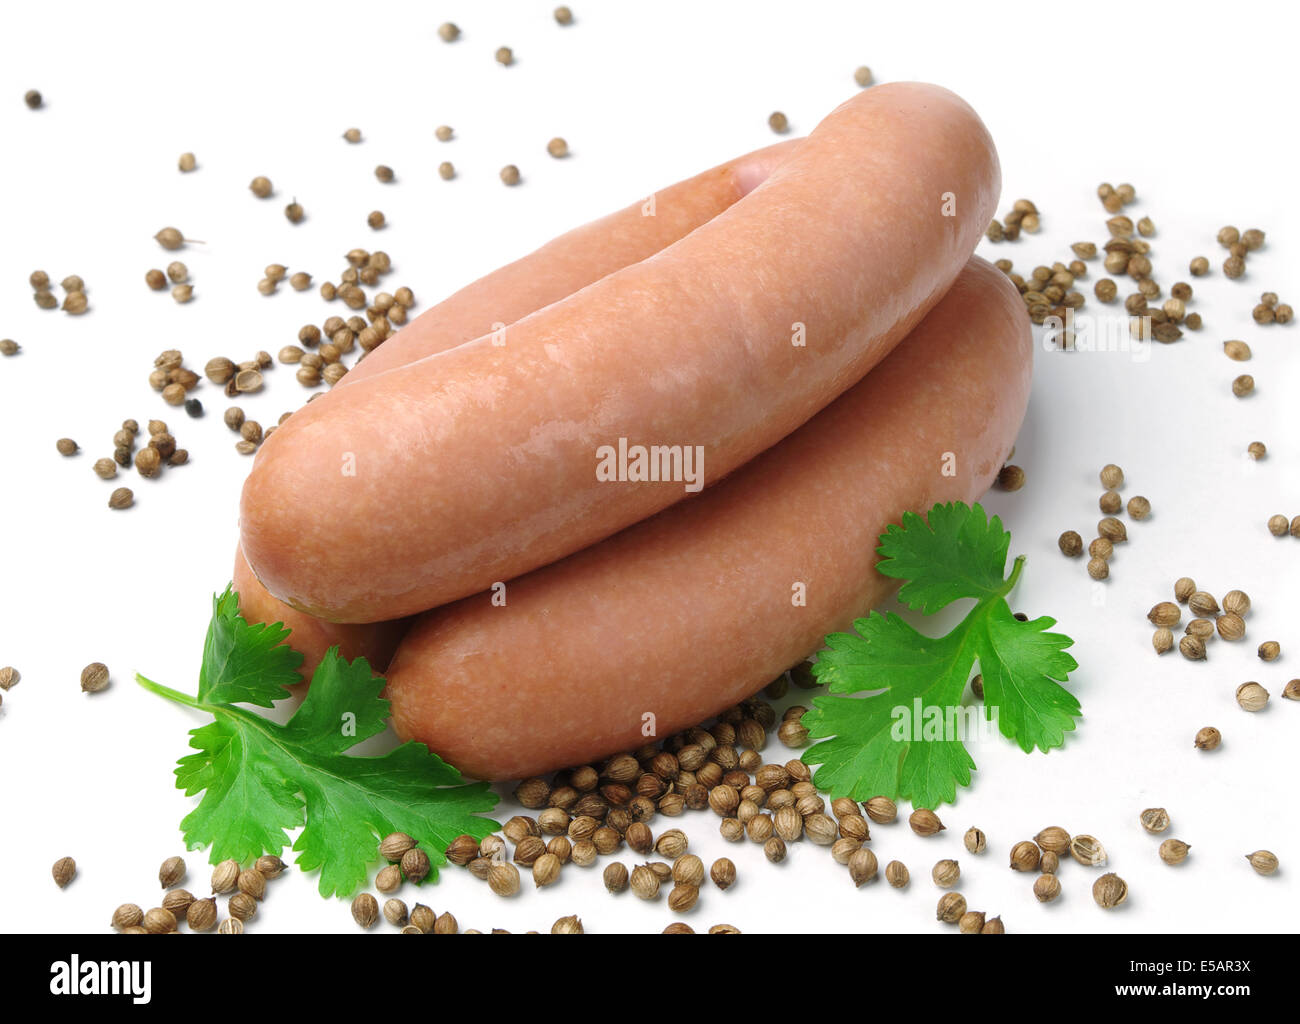 Sausages and grains of coriander Stock Photo